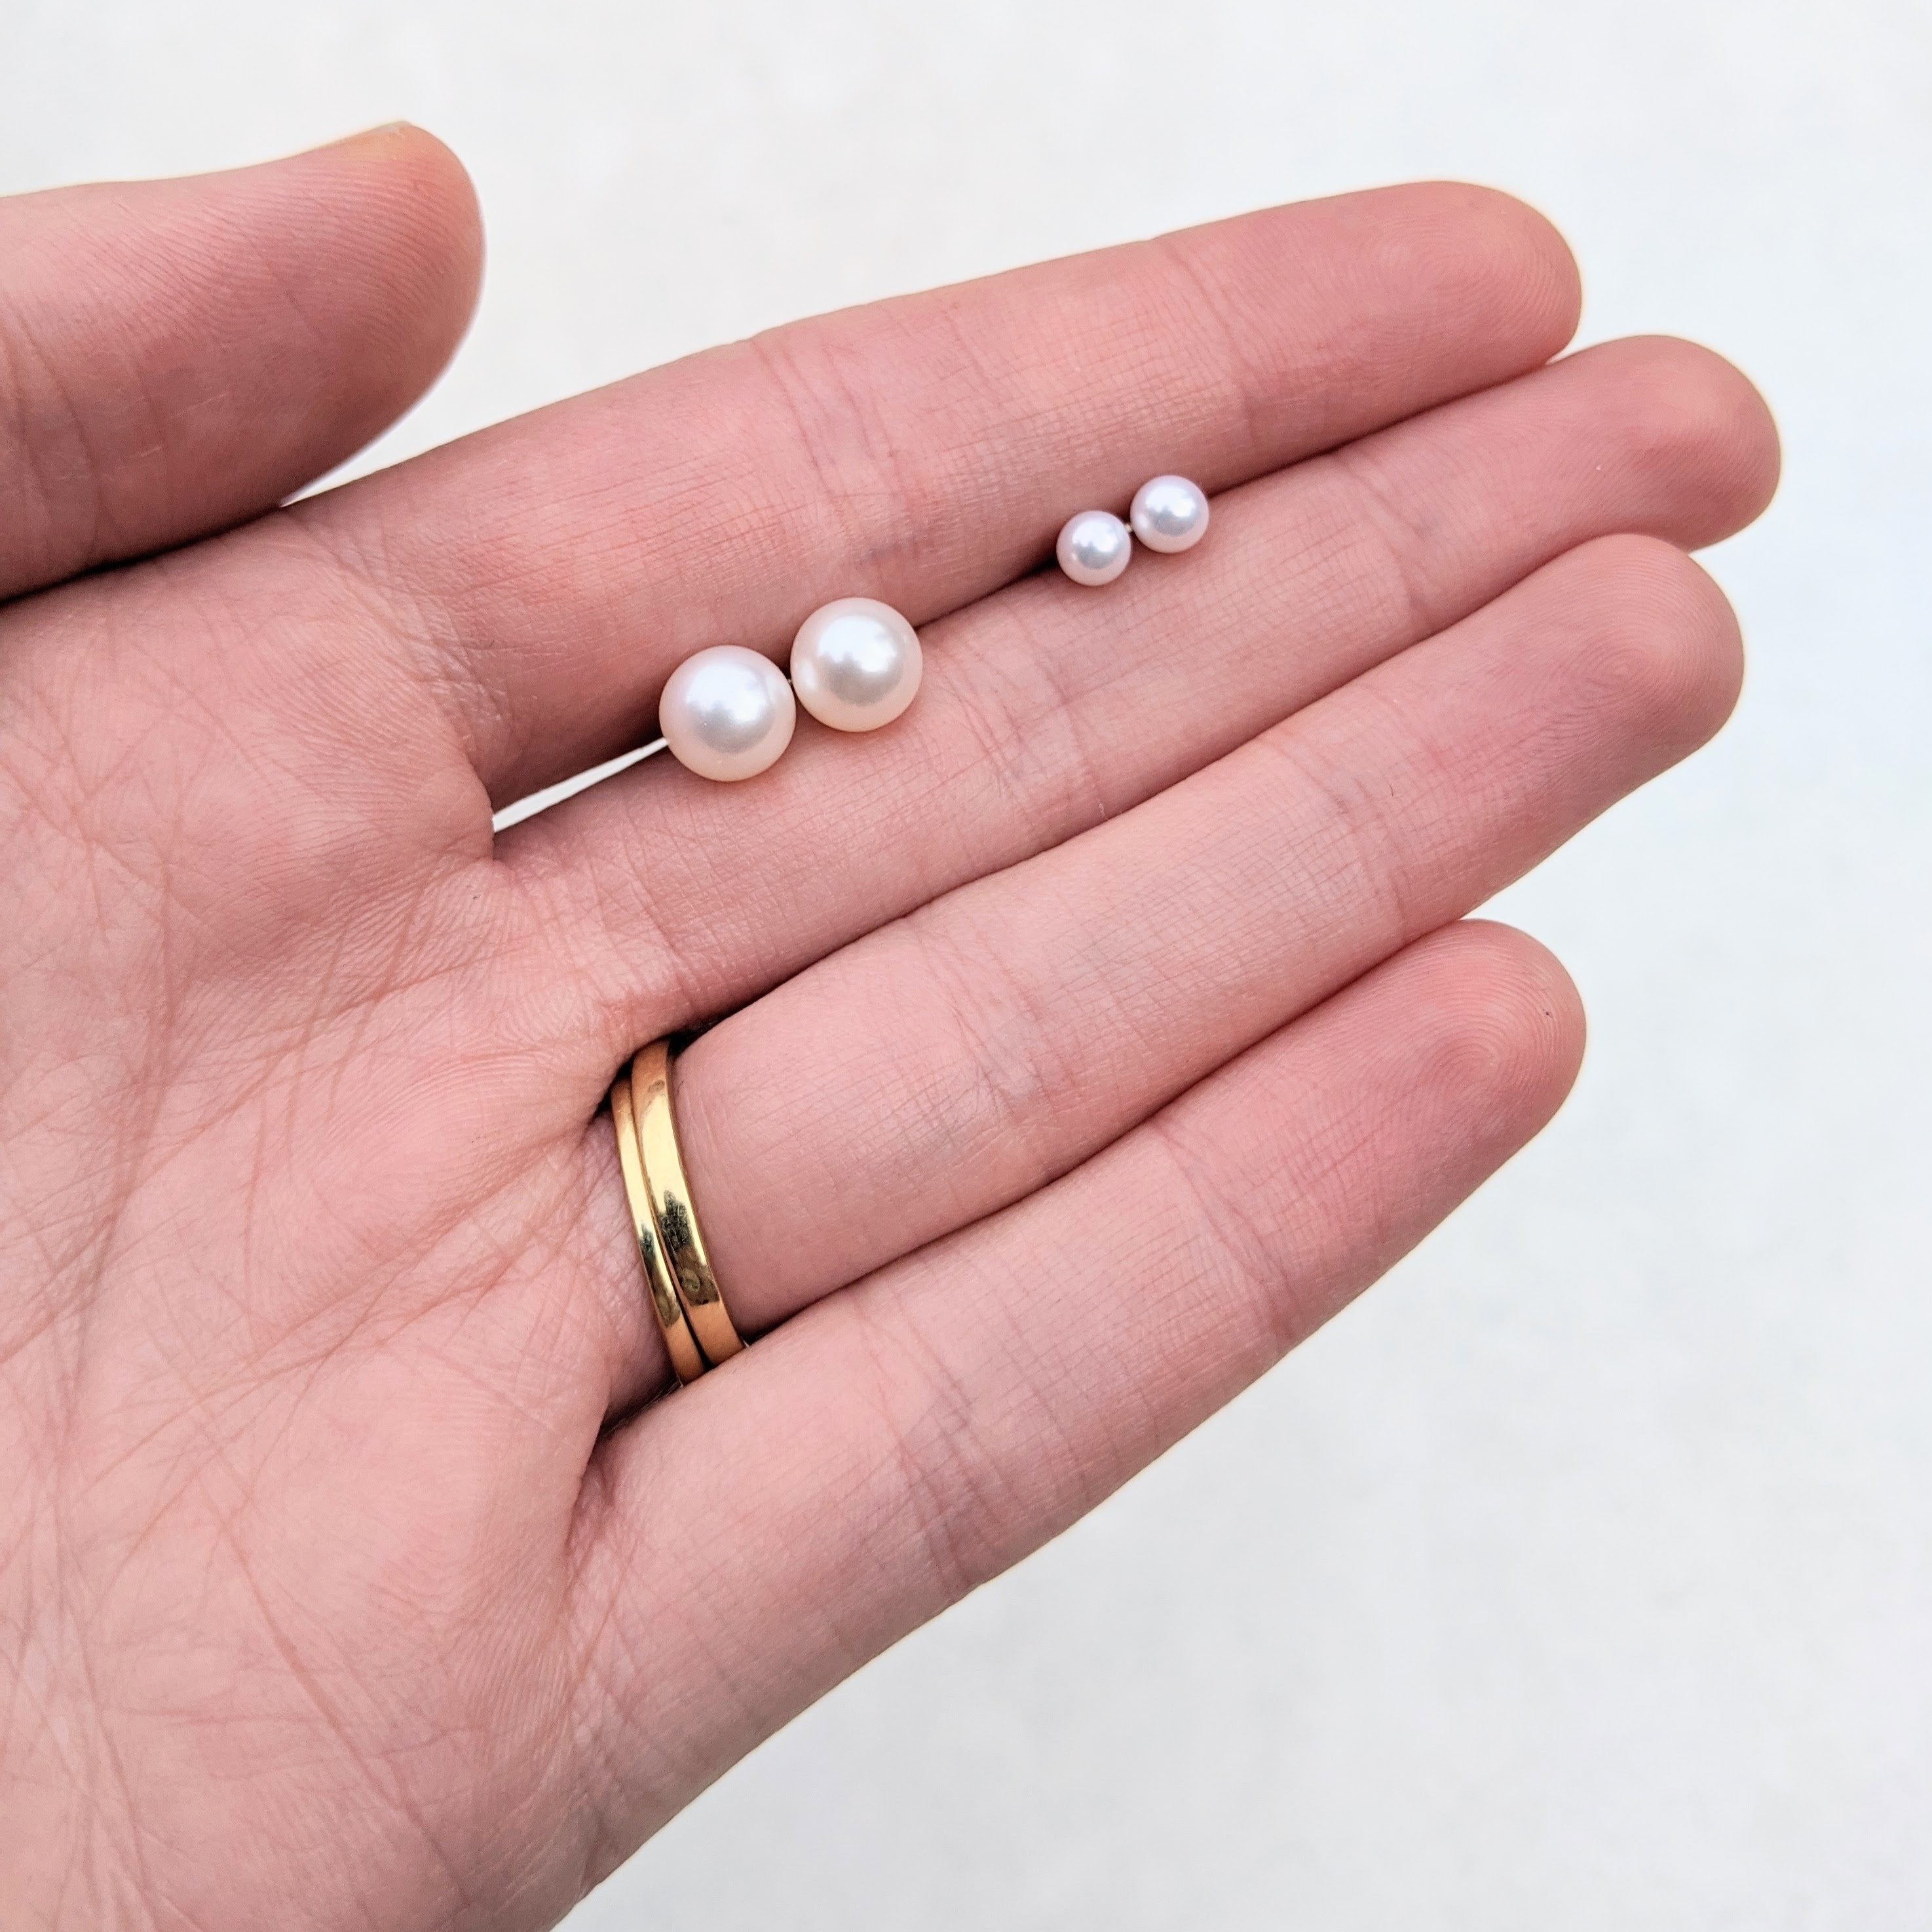 Round pearl stud earrings size comparison